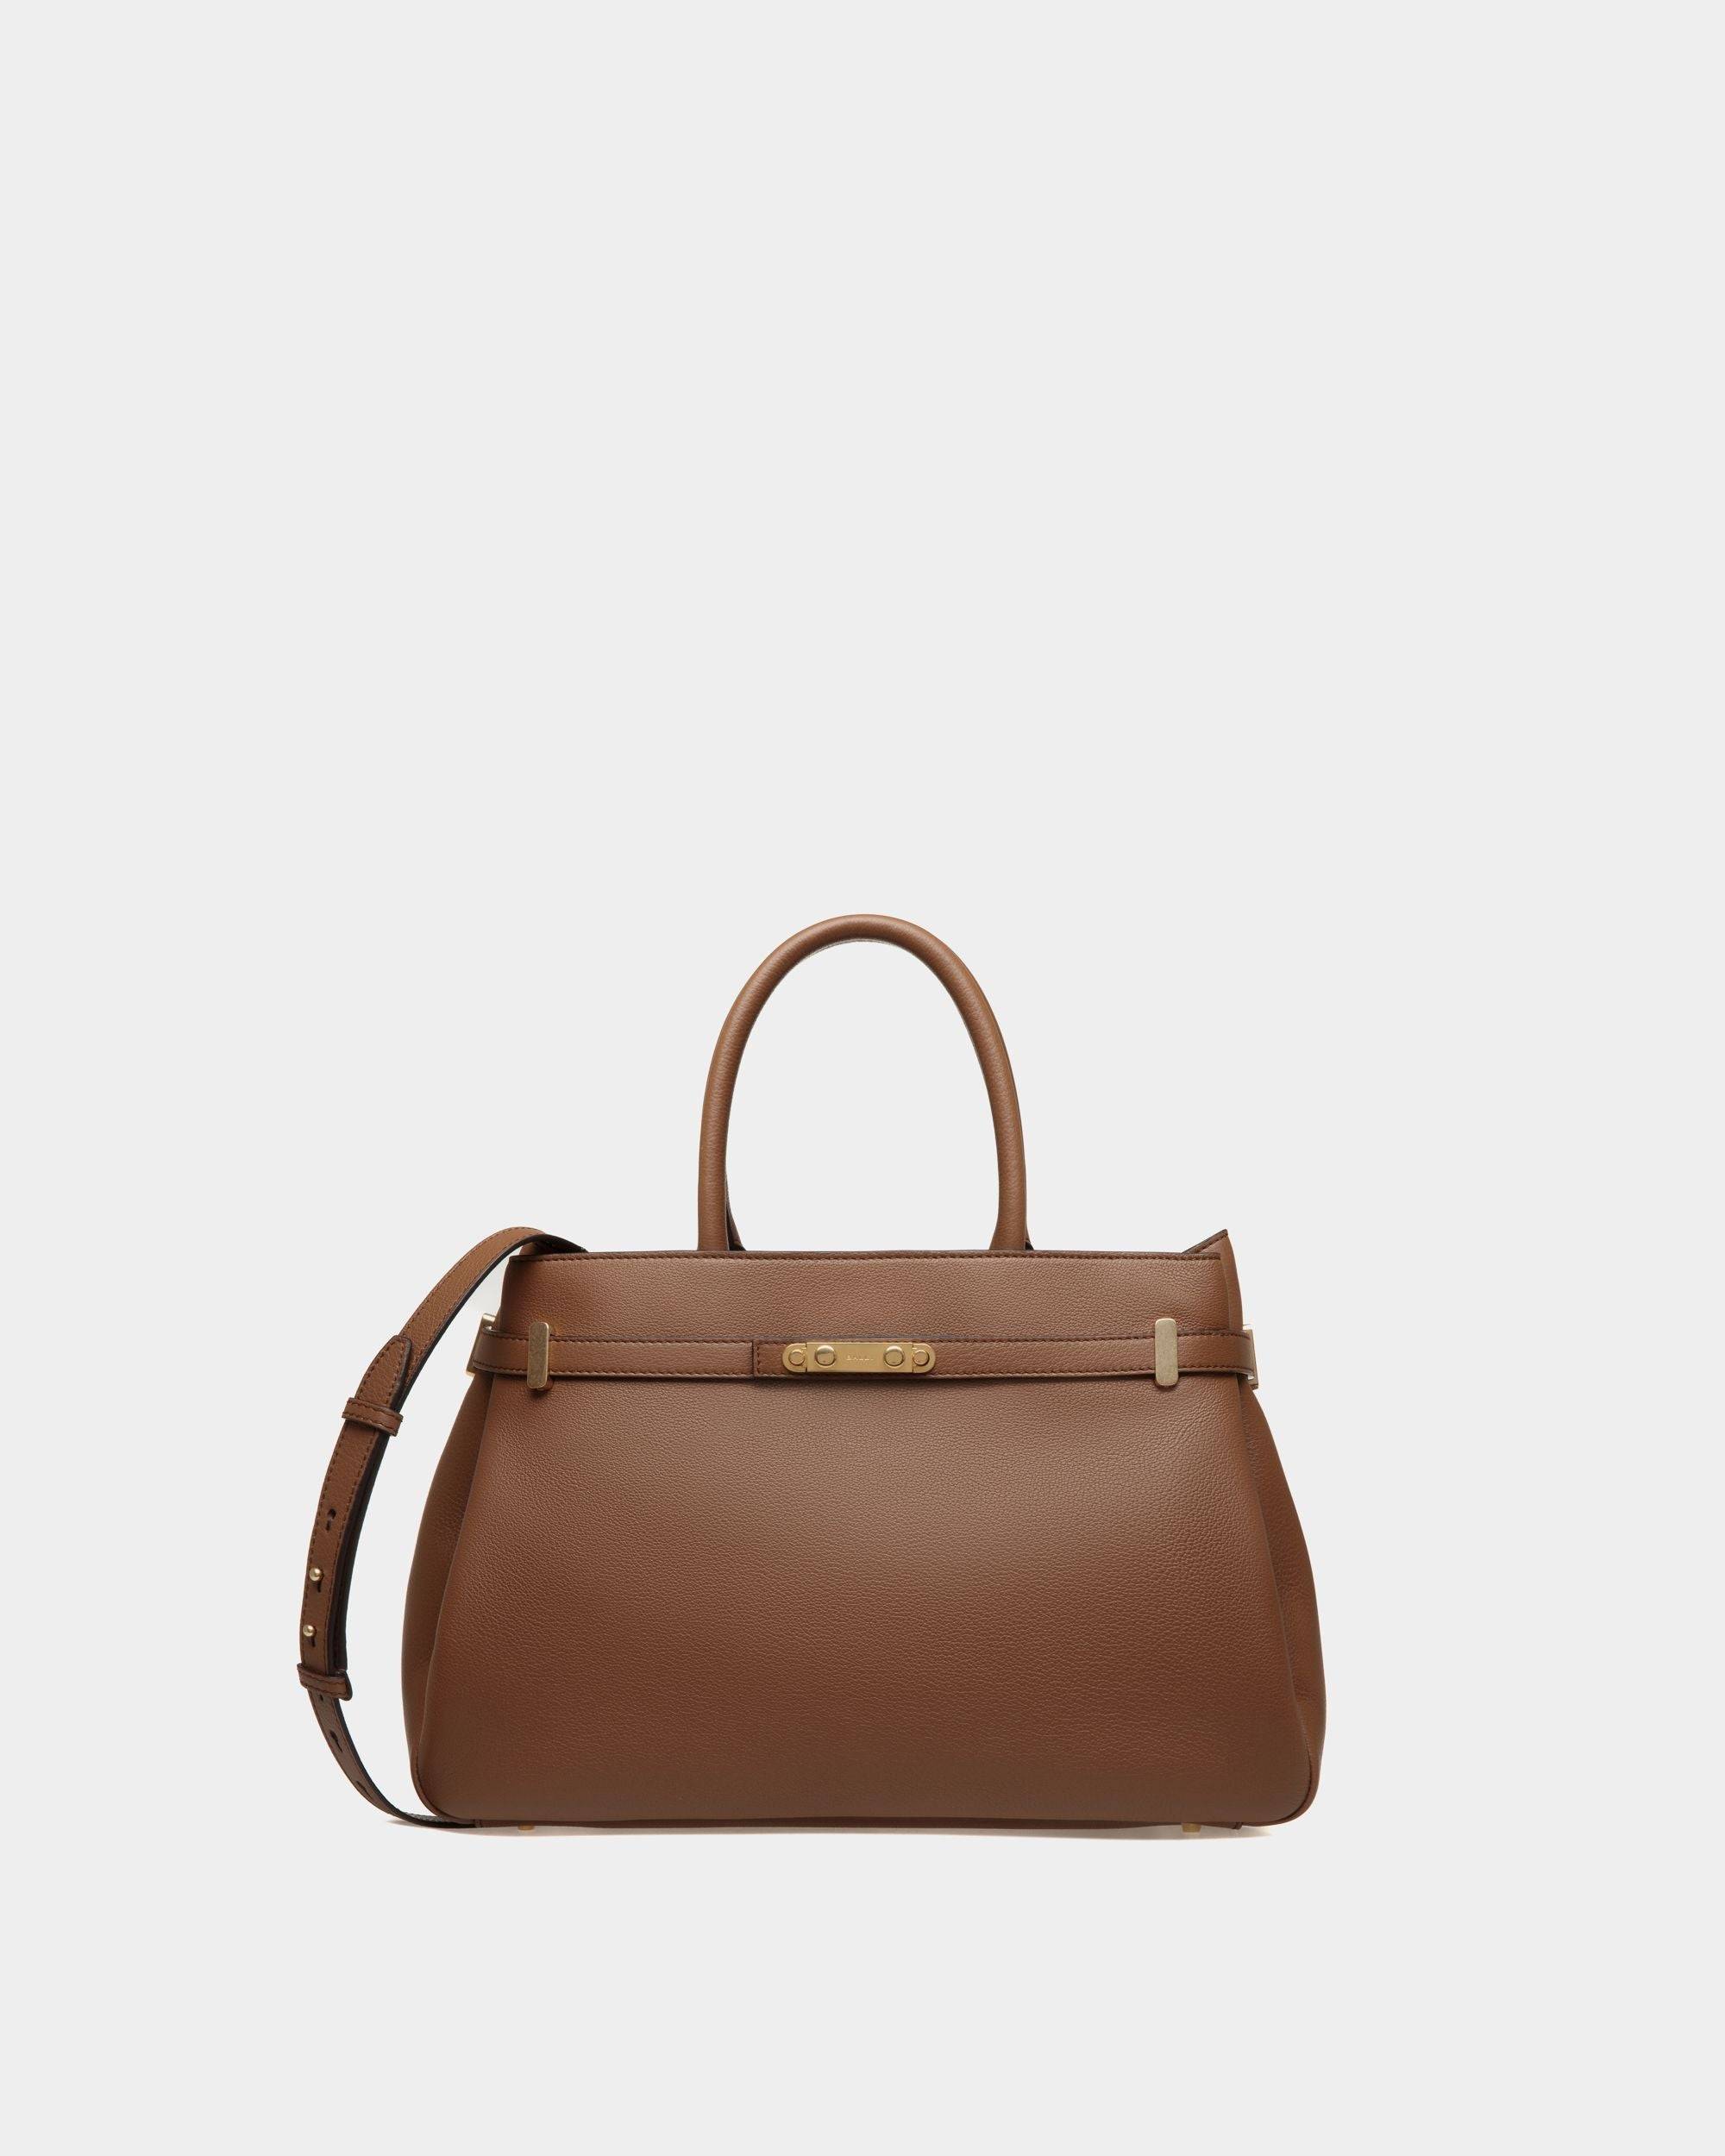 Carriage | Women's Tote Bag in Brown Leather | Bally | Still Life Front